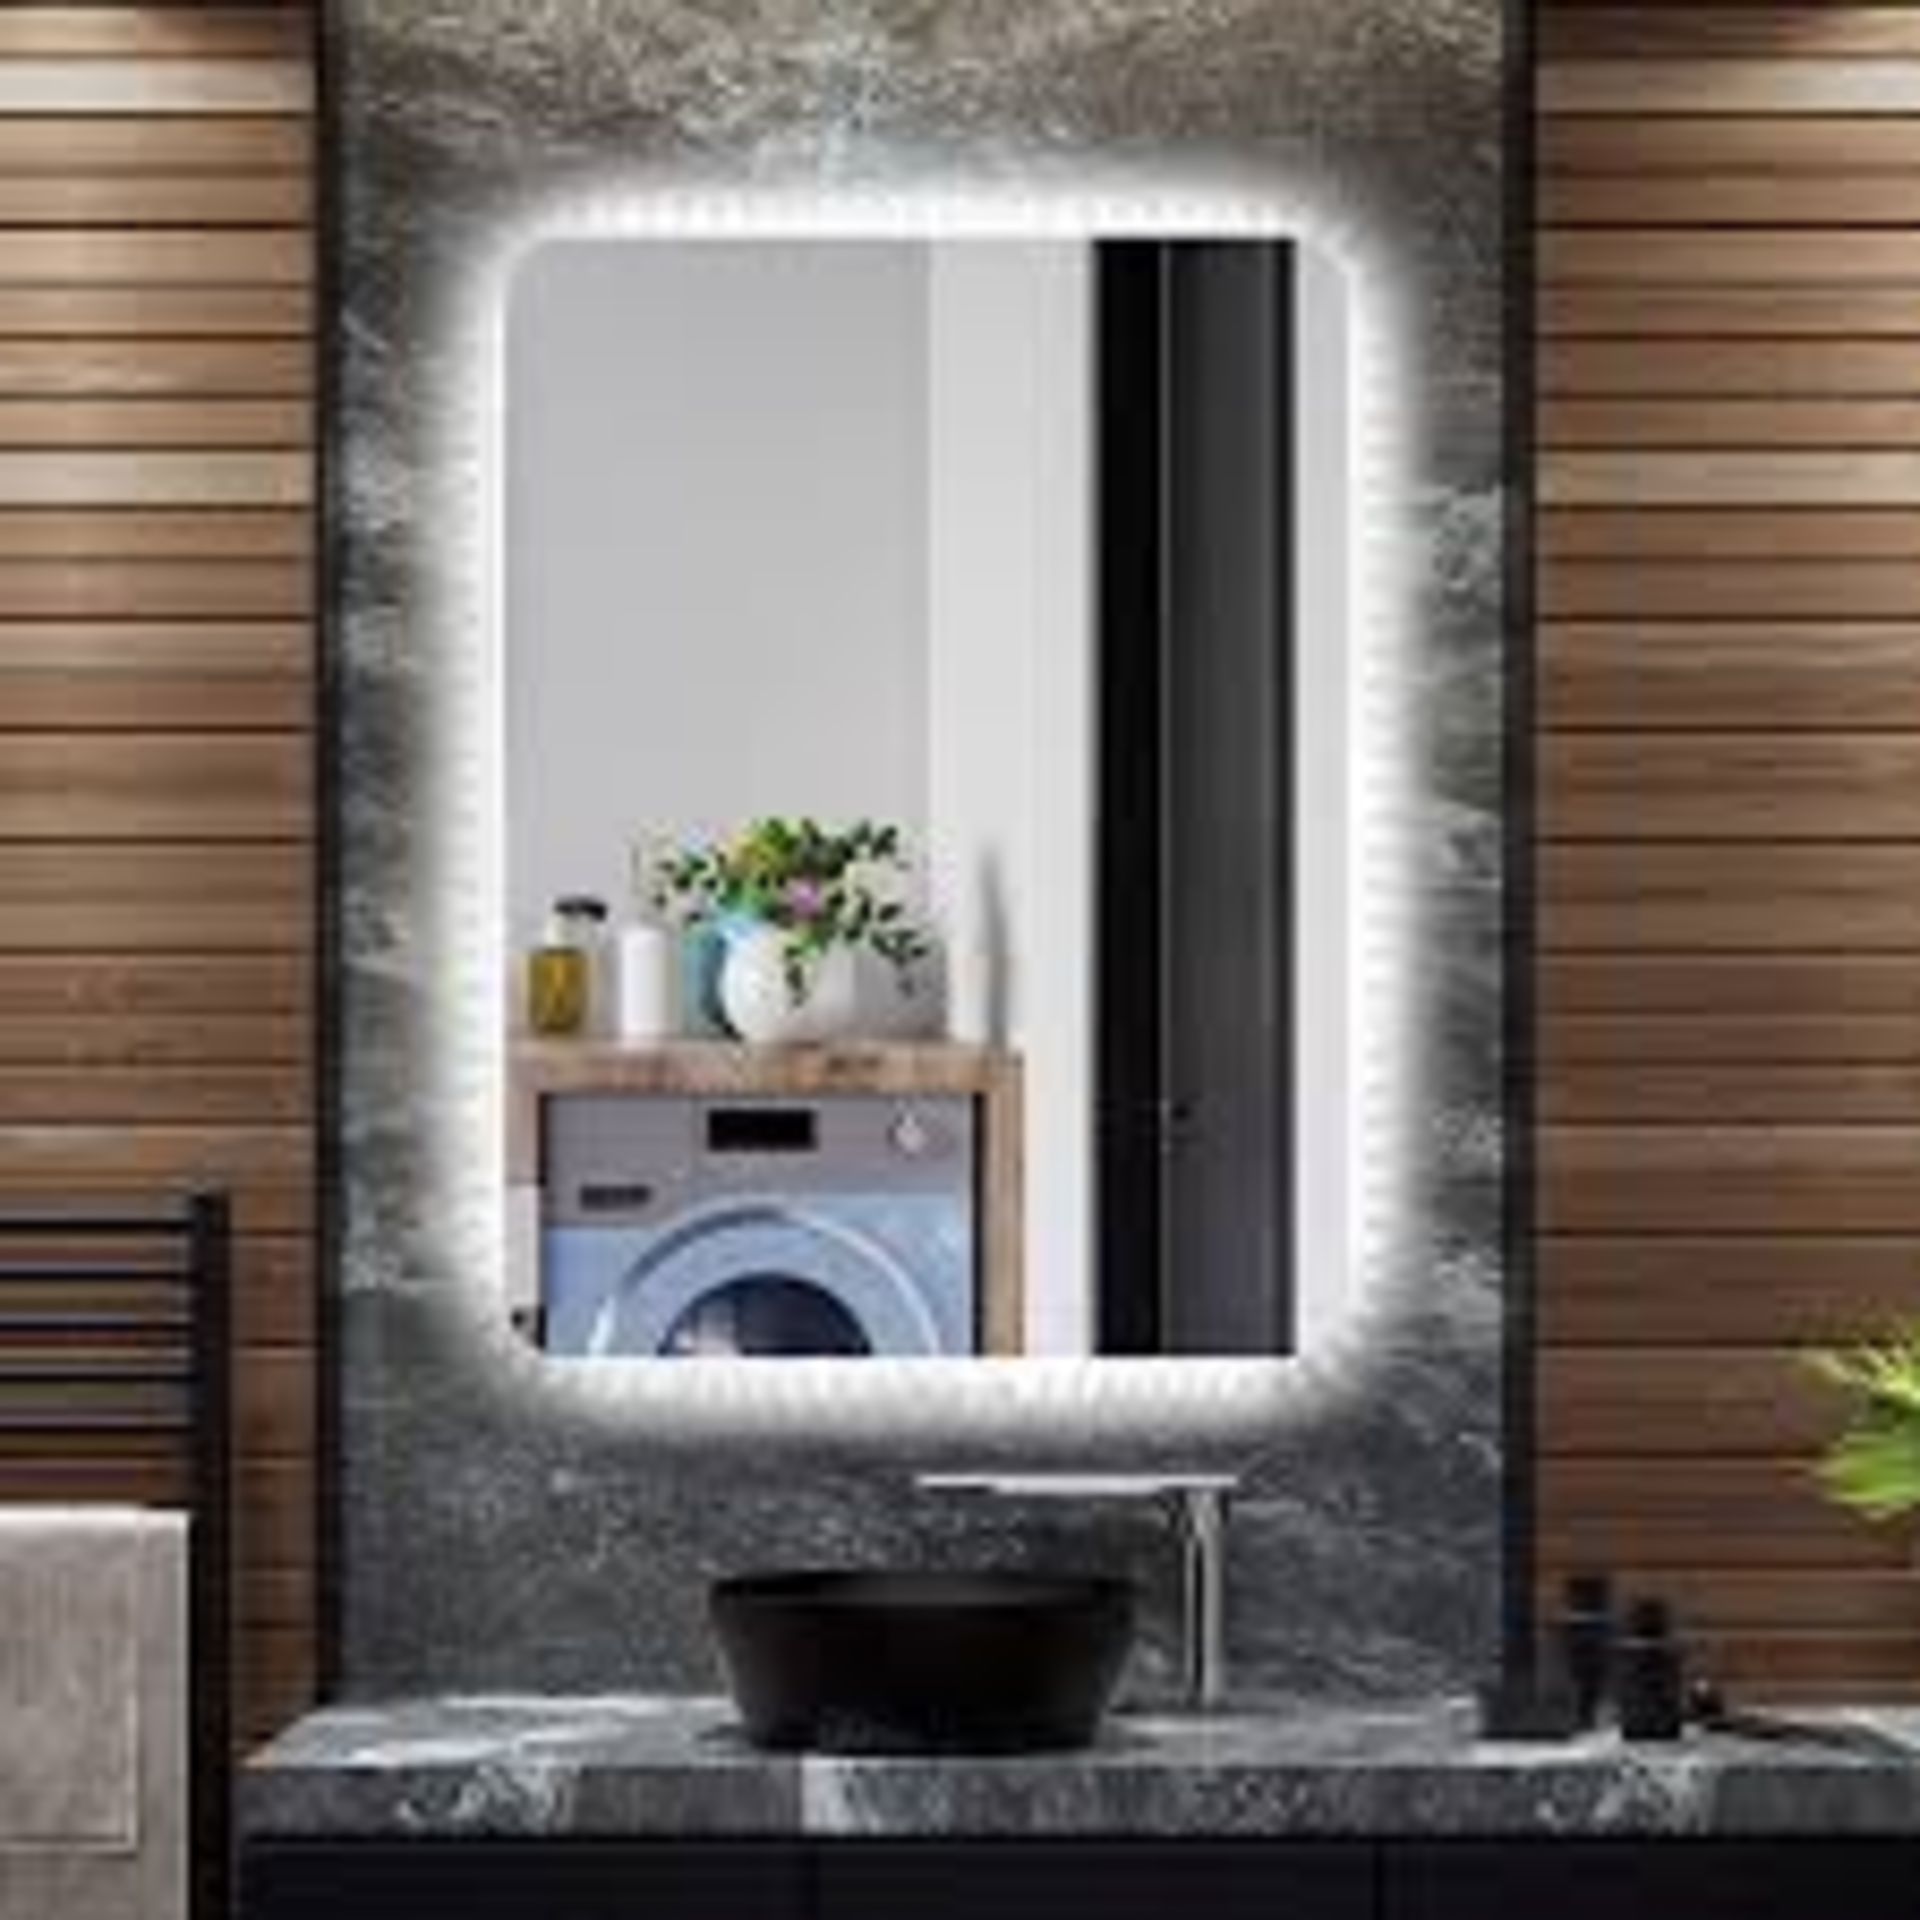 80x60cm Wall Mounted Mirror with Demister Pad . - R14.6.